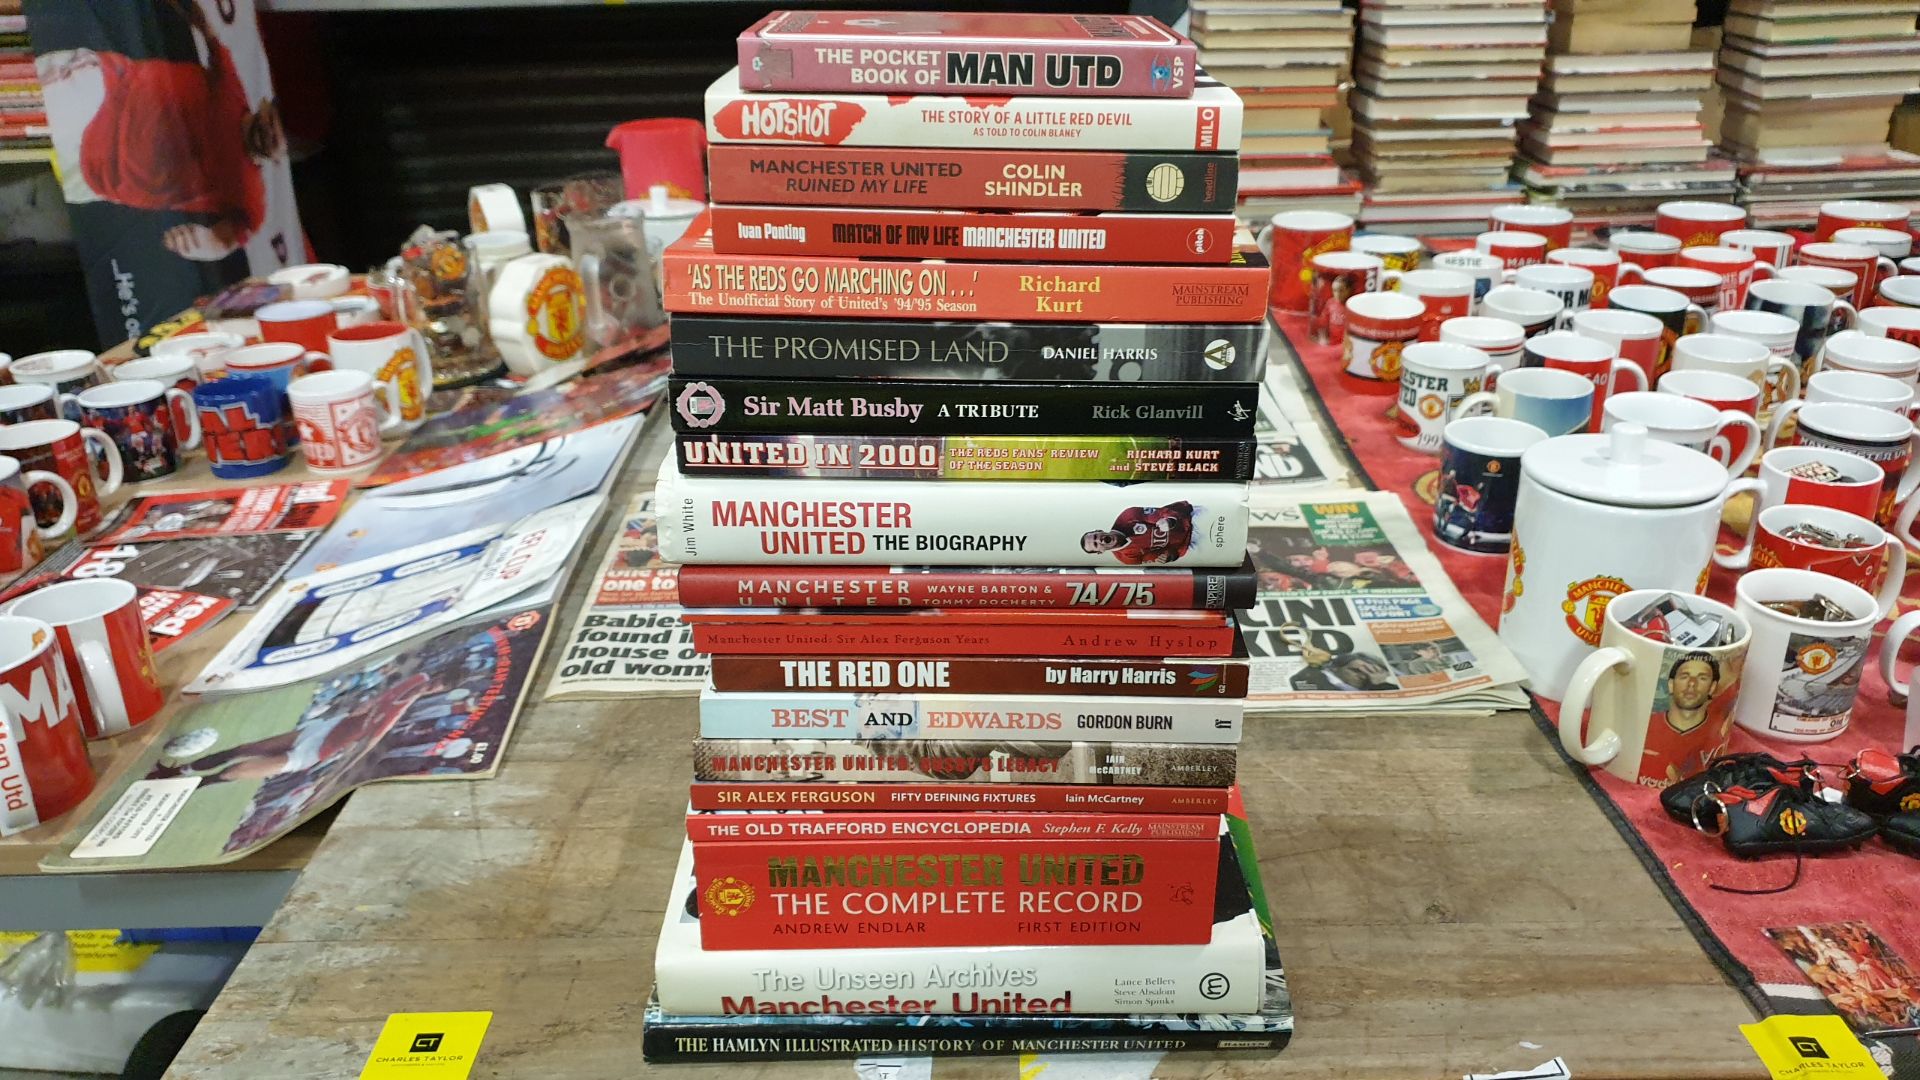 20 PIECE ASSORTED MANCHESTER UNITED BOOK LOT INCLUDING. THE POCKET BOOK OF MAN UTD BY DAVID MAY